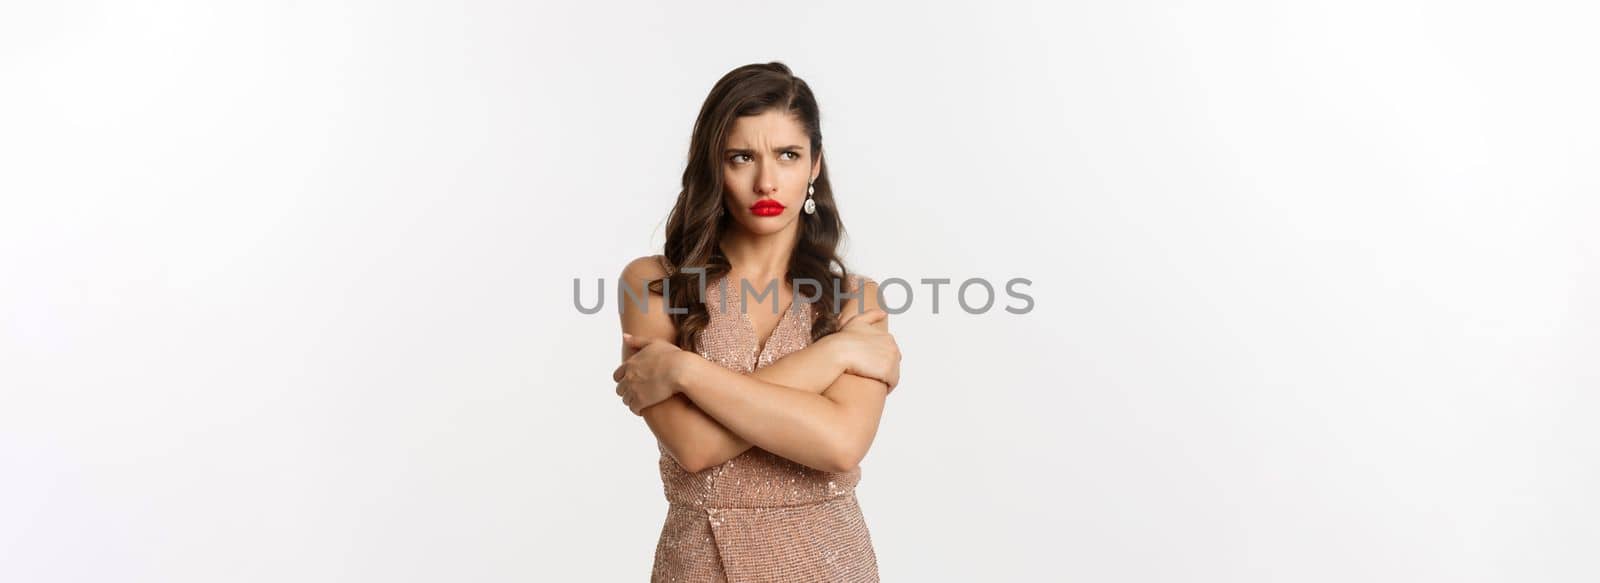 Celebration and party concept. Sulking woman looking angry, dressed for formal event in glamour dress, hugging herself and pouting upset, white background.